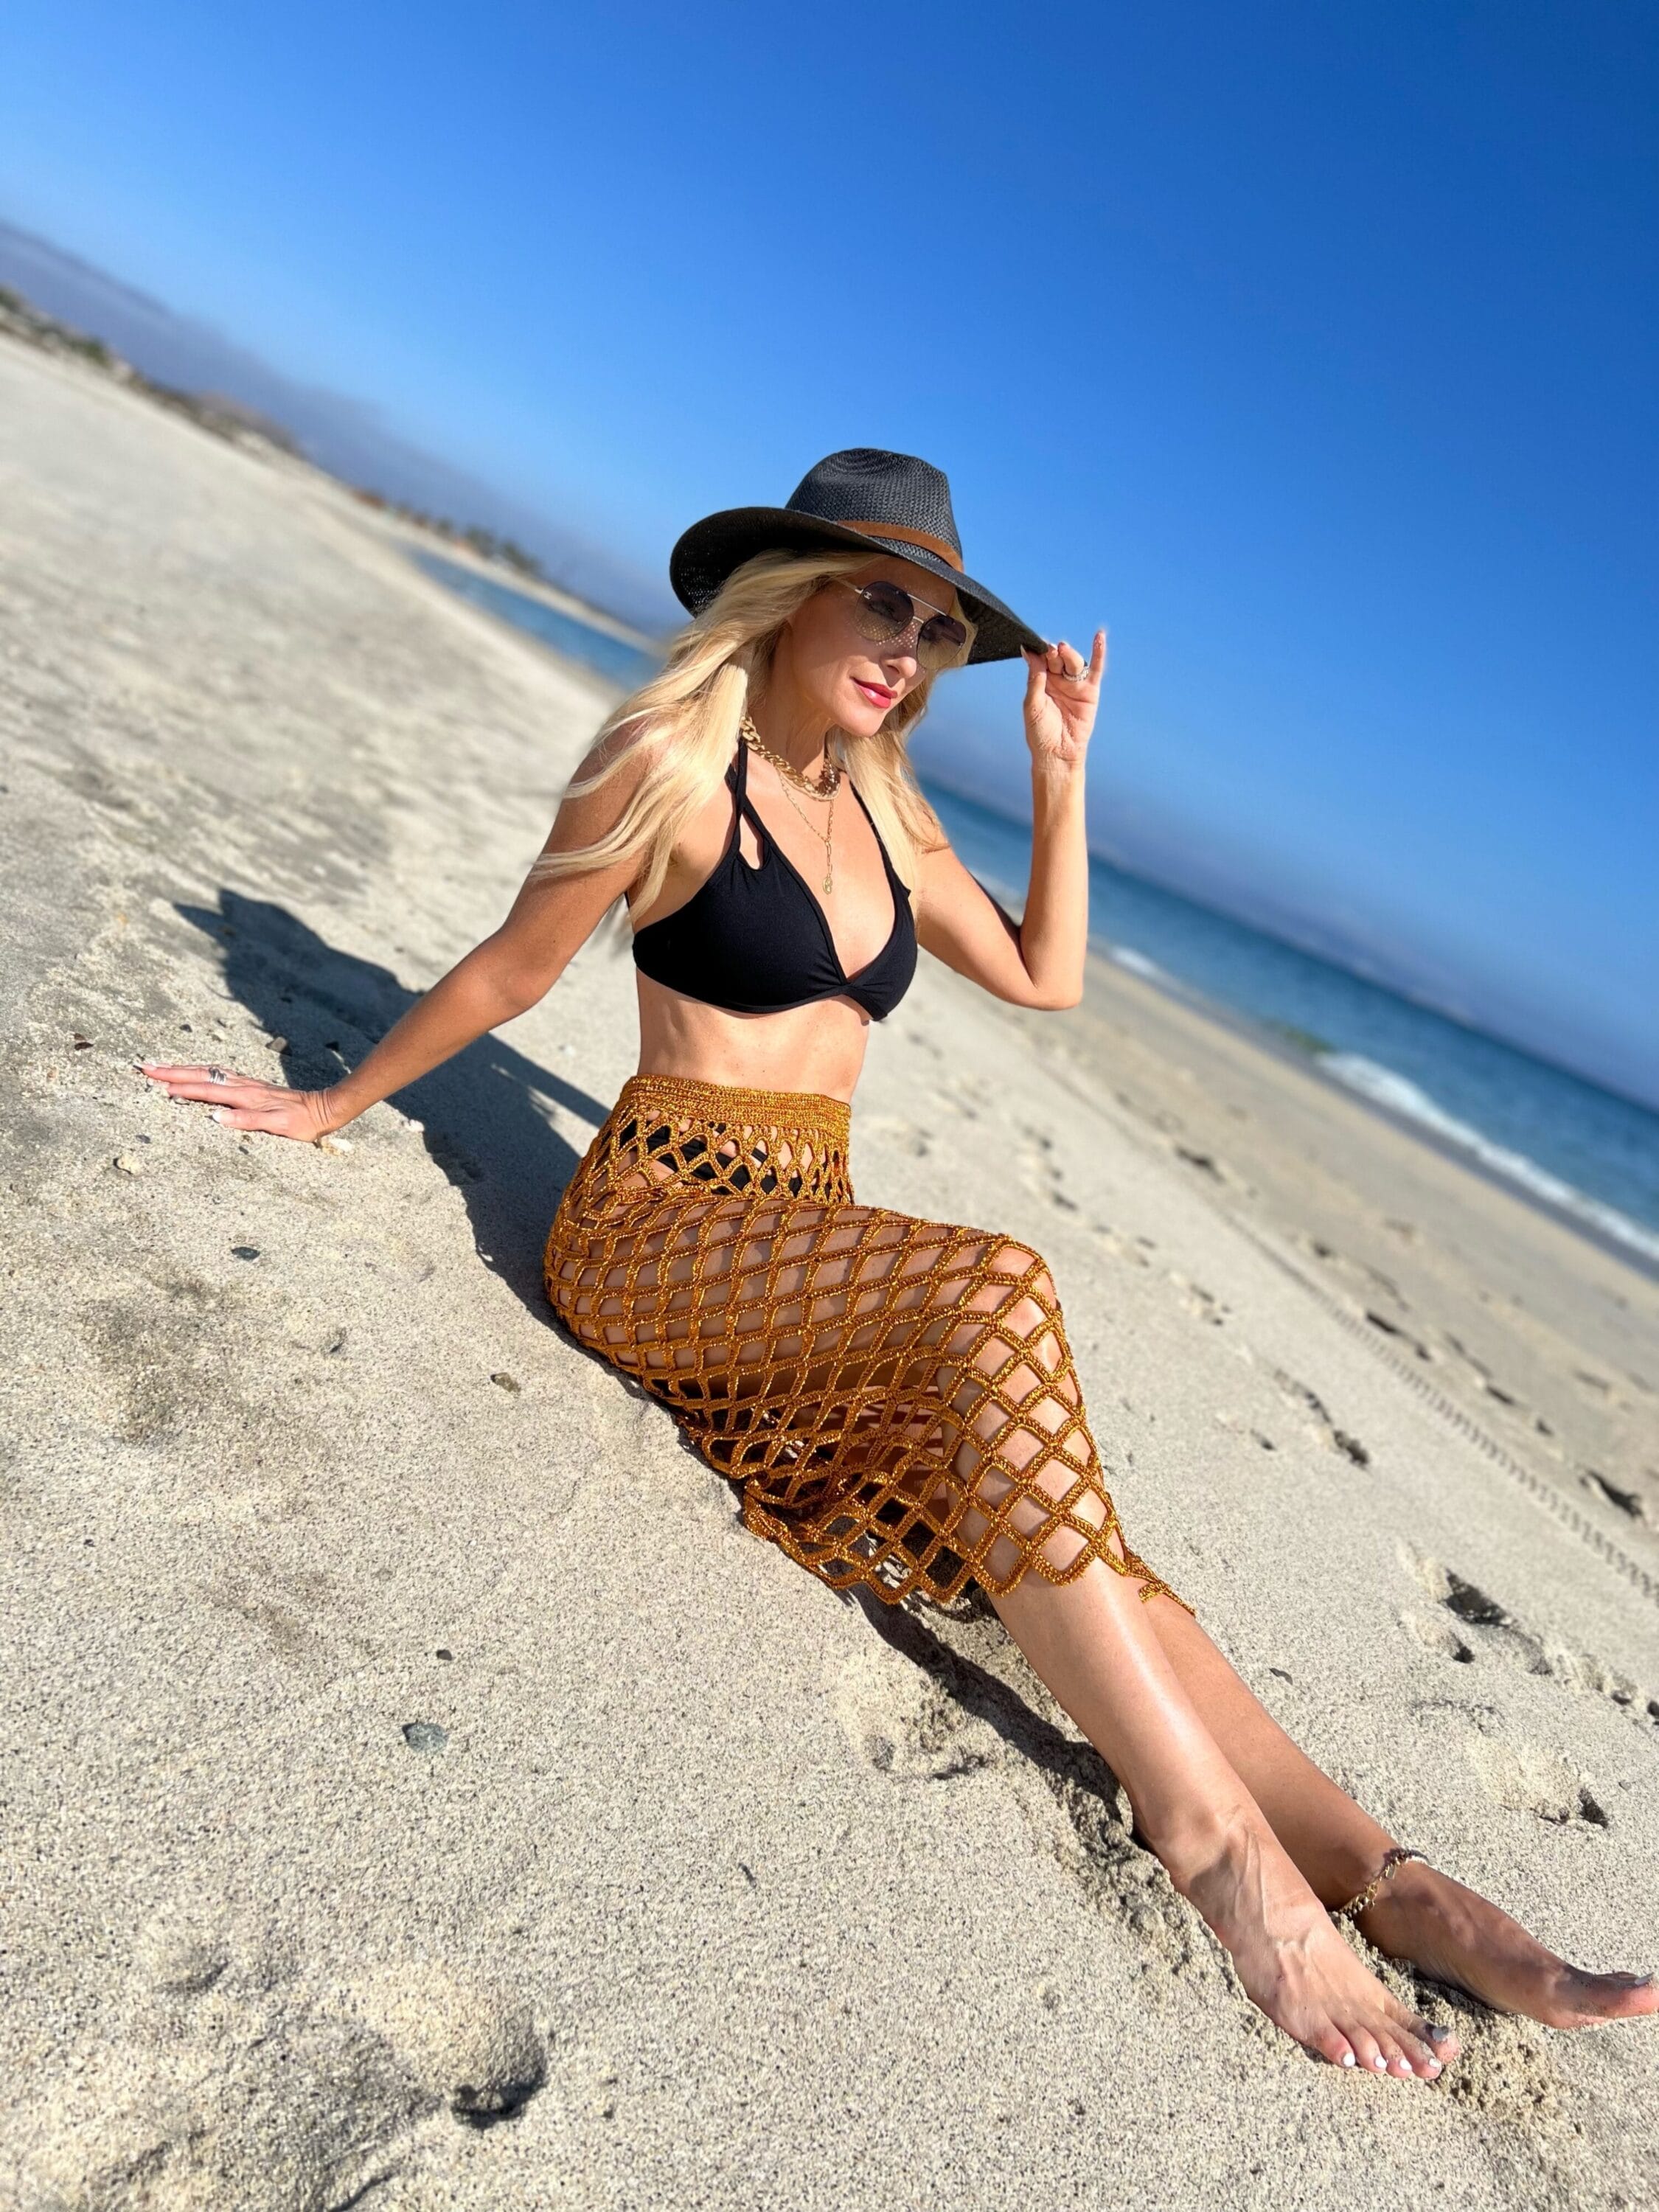 Dallas fashion blogger over 40 wearing black bikini and crochet cover up laying on sandy beach